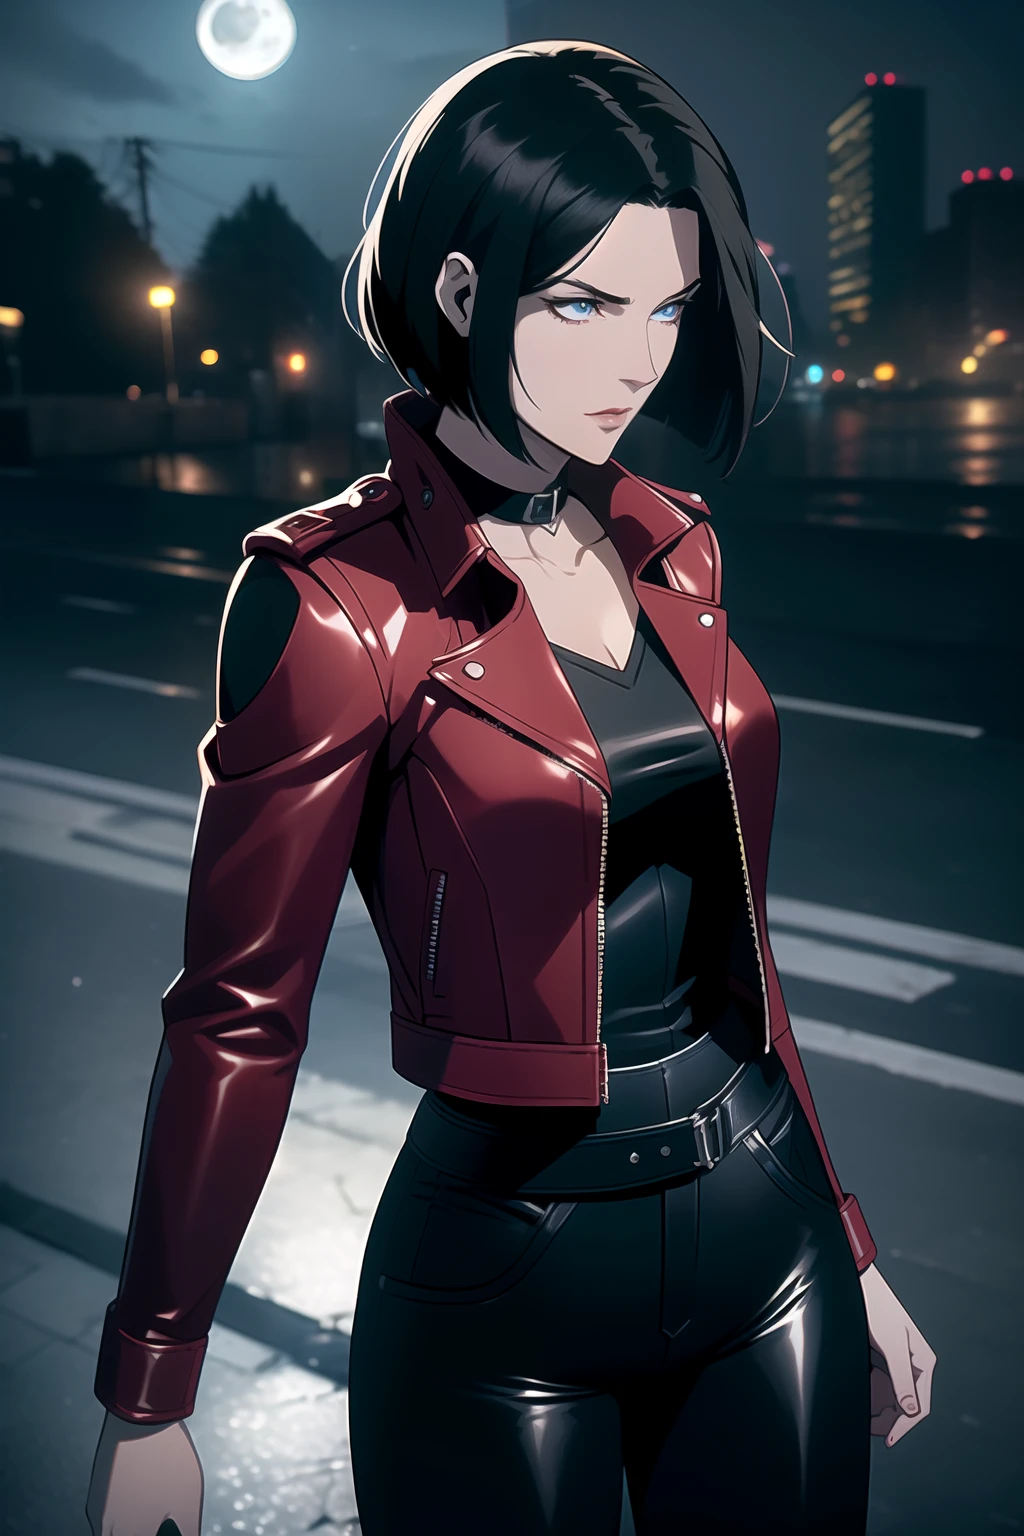 (Masterpiece, Best Quality), (A Gorgeous 25 Years Old British Female Vampire Mercenary), (Wavy Bobcut Black Hair:1.4), (Pale Skin:1.2), (Blue Eyes), (Serious Looking), (Wearing Red Leather Jacket, Black V-Neck Inner Shirt, and Black Tight Pants:1.6), (Busty Chest Size:1.4), (Dynamic Pose:1.4), (City Road at Night with Moonlight:1.6), Centered, (Waist-up Shot:1.4), From Front Shot, Insane Details, Intricate Face Detail, Intricate Hand Details, Cinematic Shot and Lighting, Realistic and Vibrant Colors, Masterpiece, Sharp Focus, Ultra Detailed, Taken with DSLR camera, Depth of Field, Incredibly Realistic Environment and Scene, Master Composition and Cinematography, castlevania style